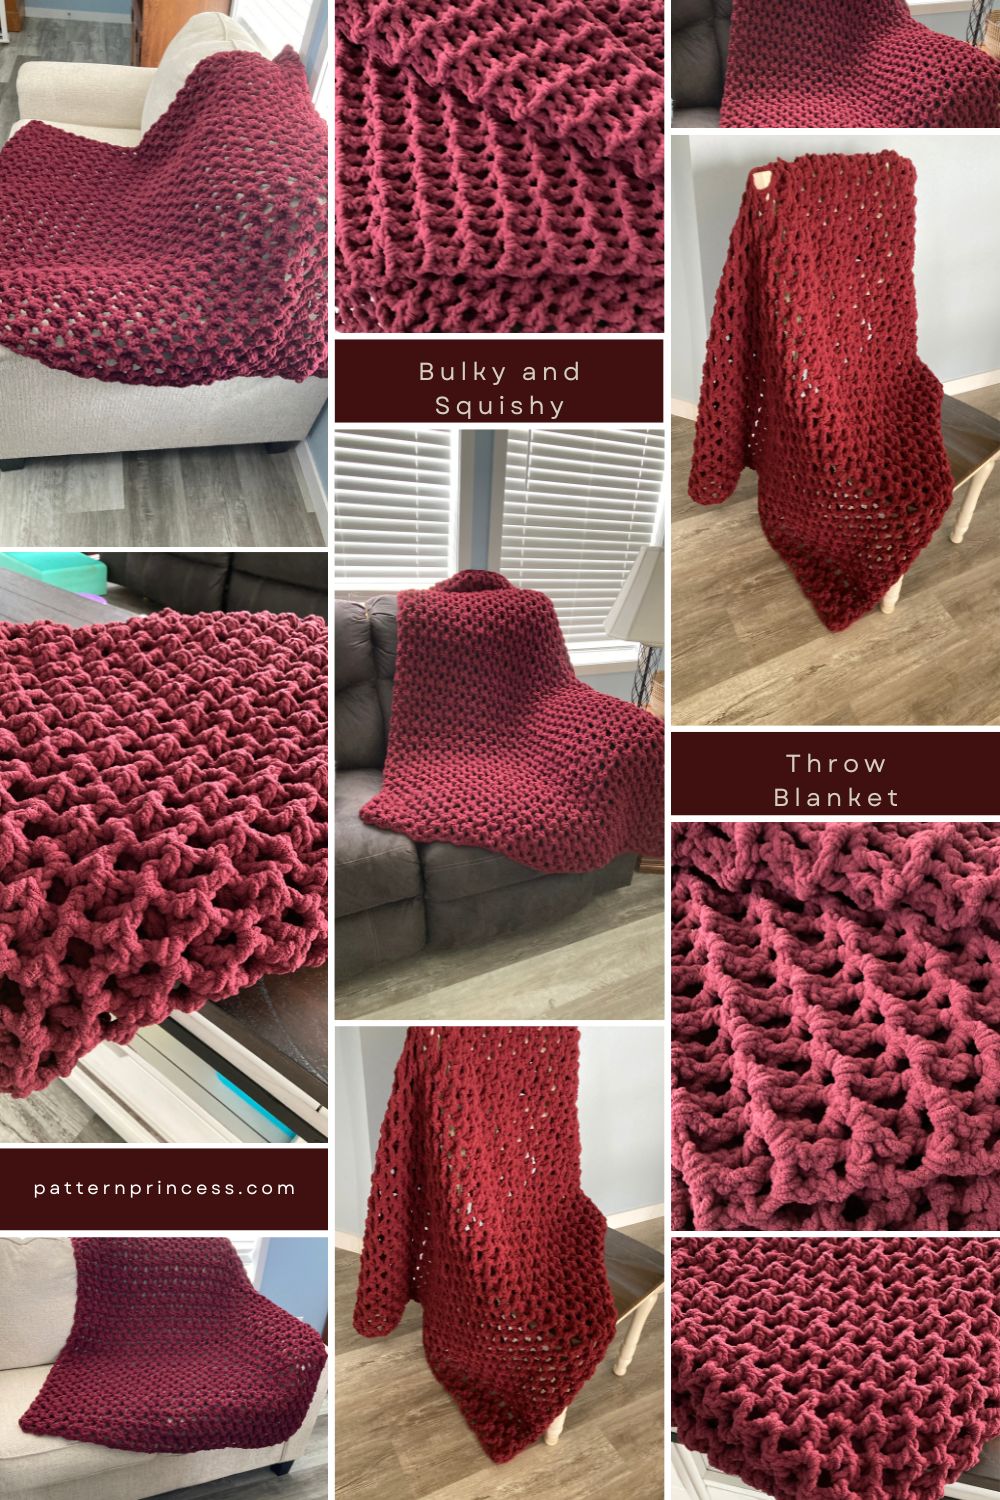 Bulky and Squishy Blanket Photo Collage